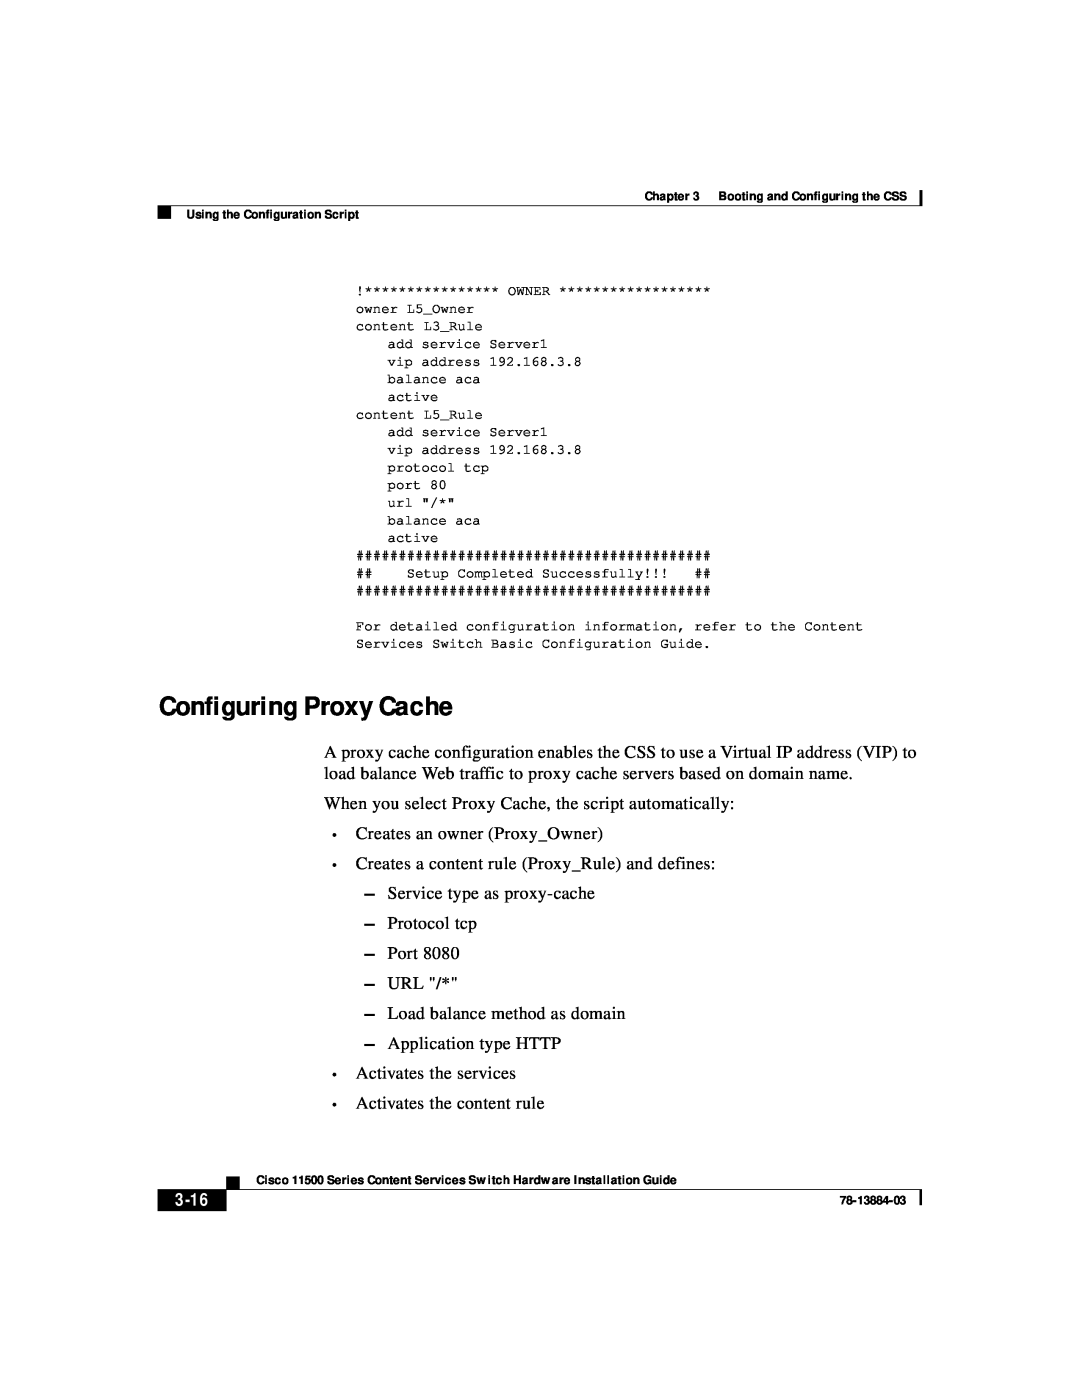 Cisco Systems 11500 Series manual Configuring Proxy Cache, 3-16, owner L5Owner content L3Rule 